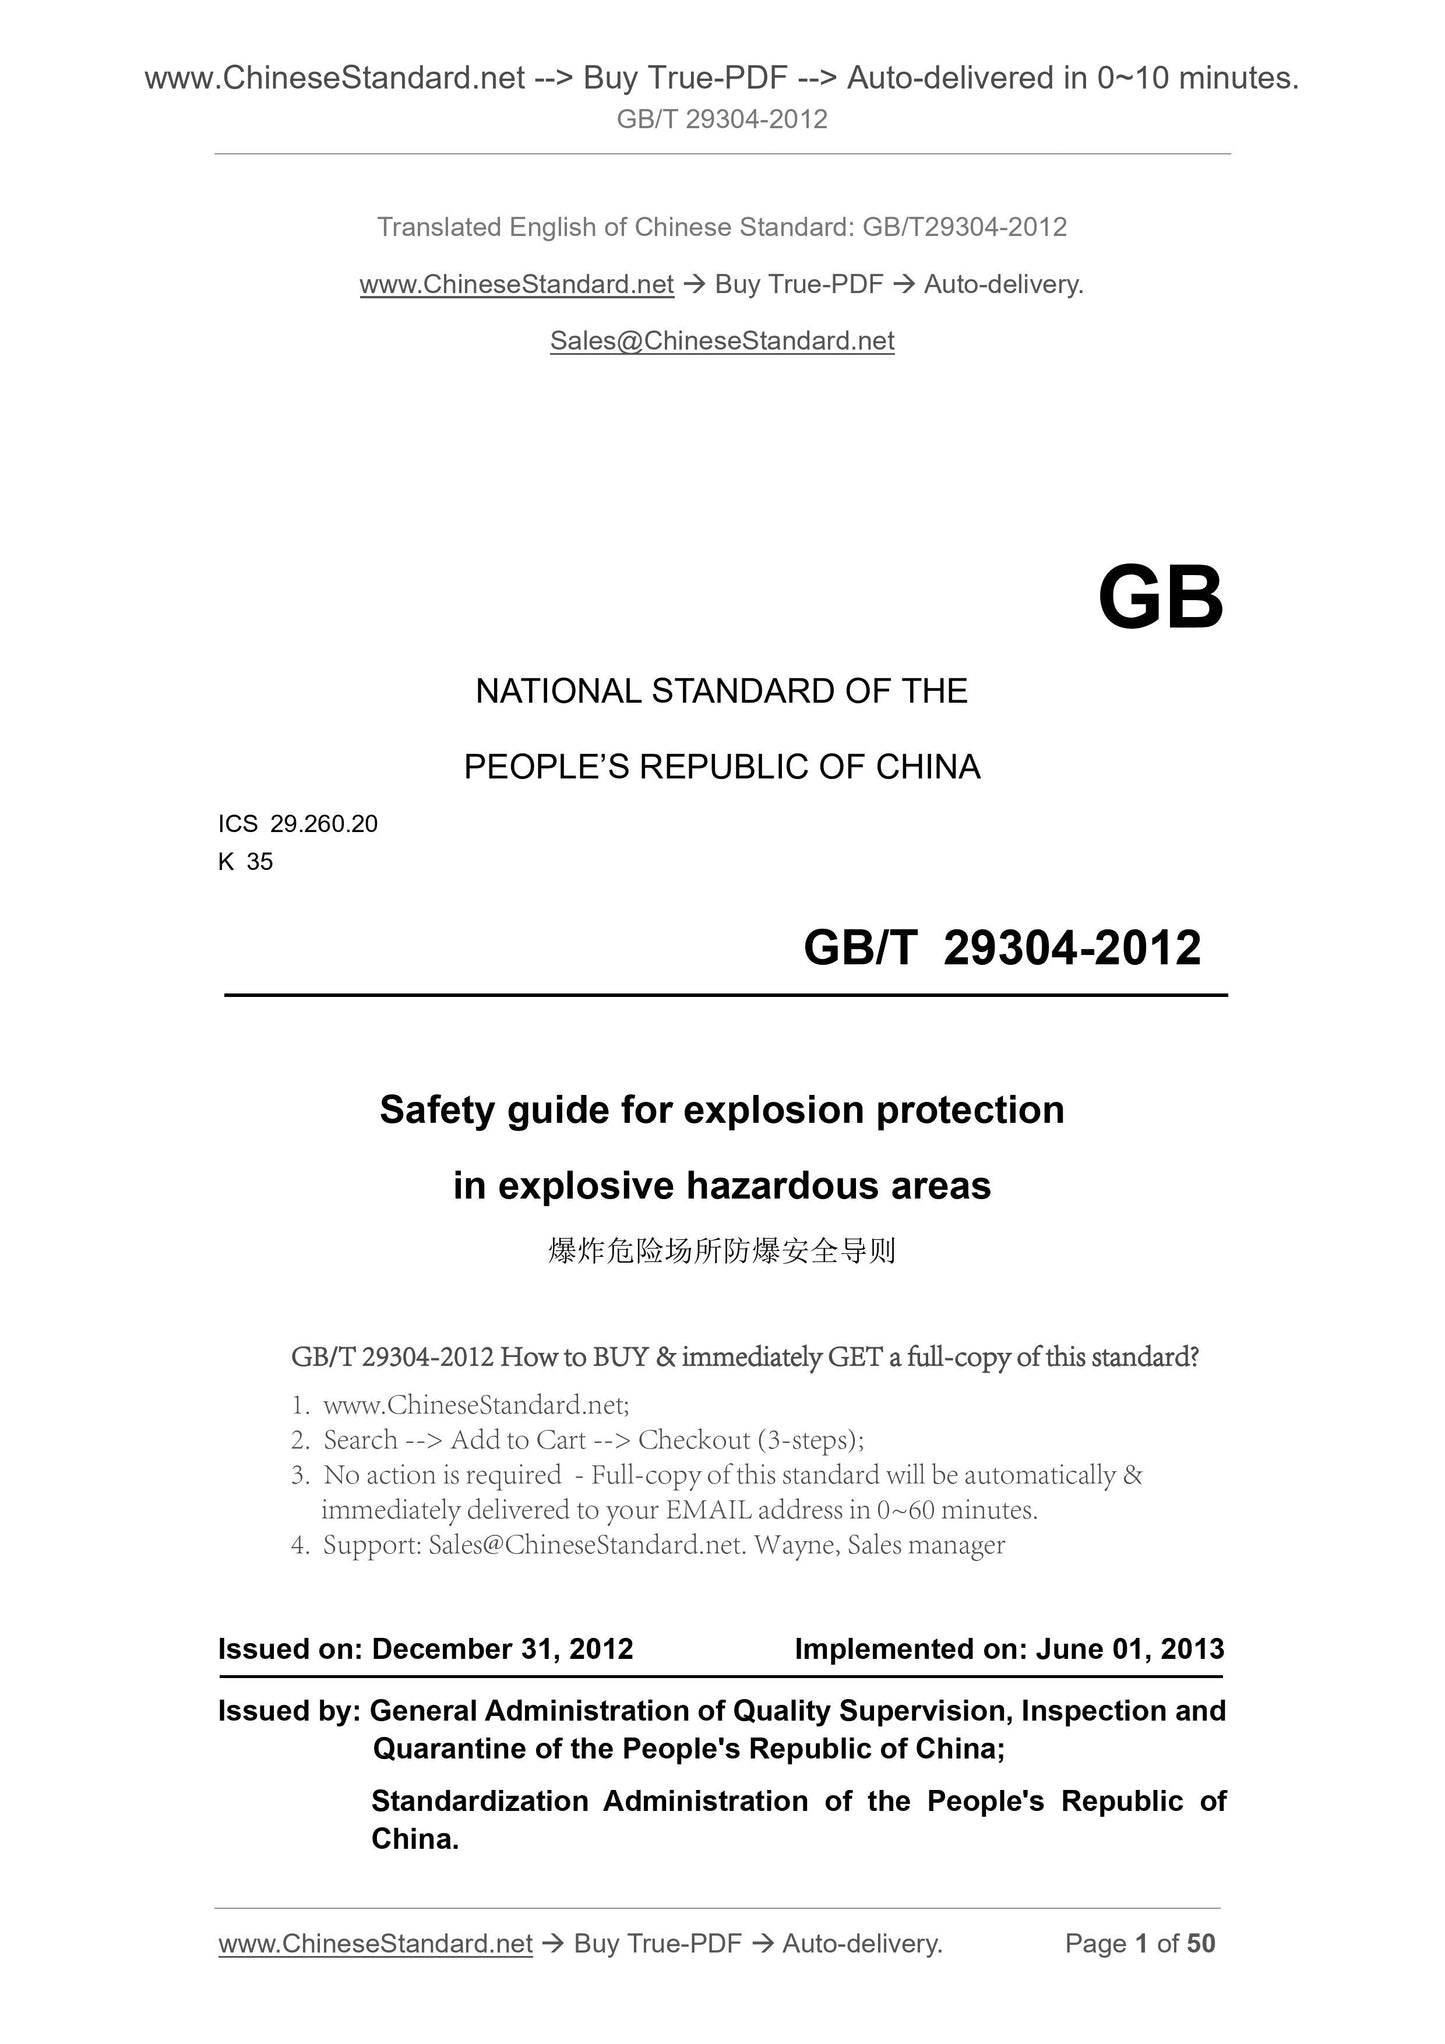 GB/T 29304-2012 Page 1